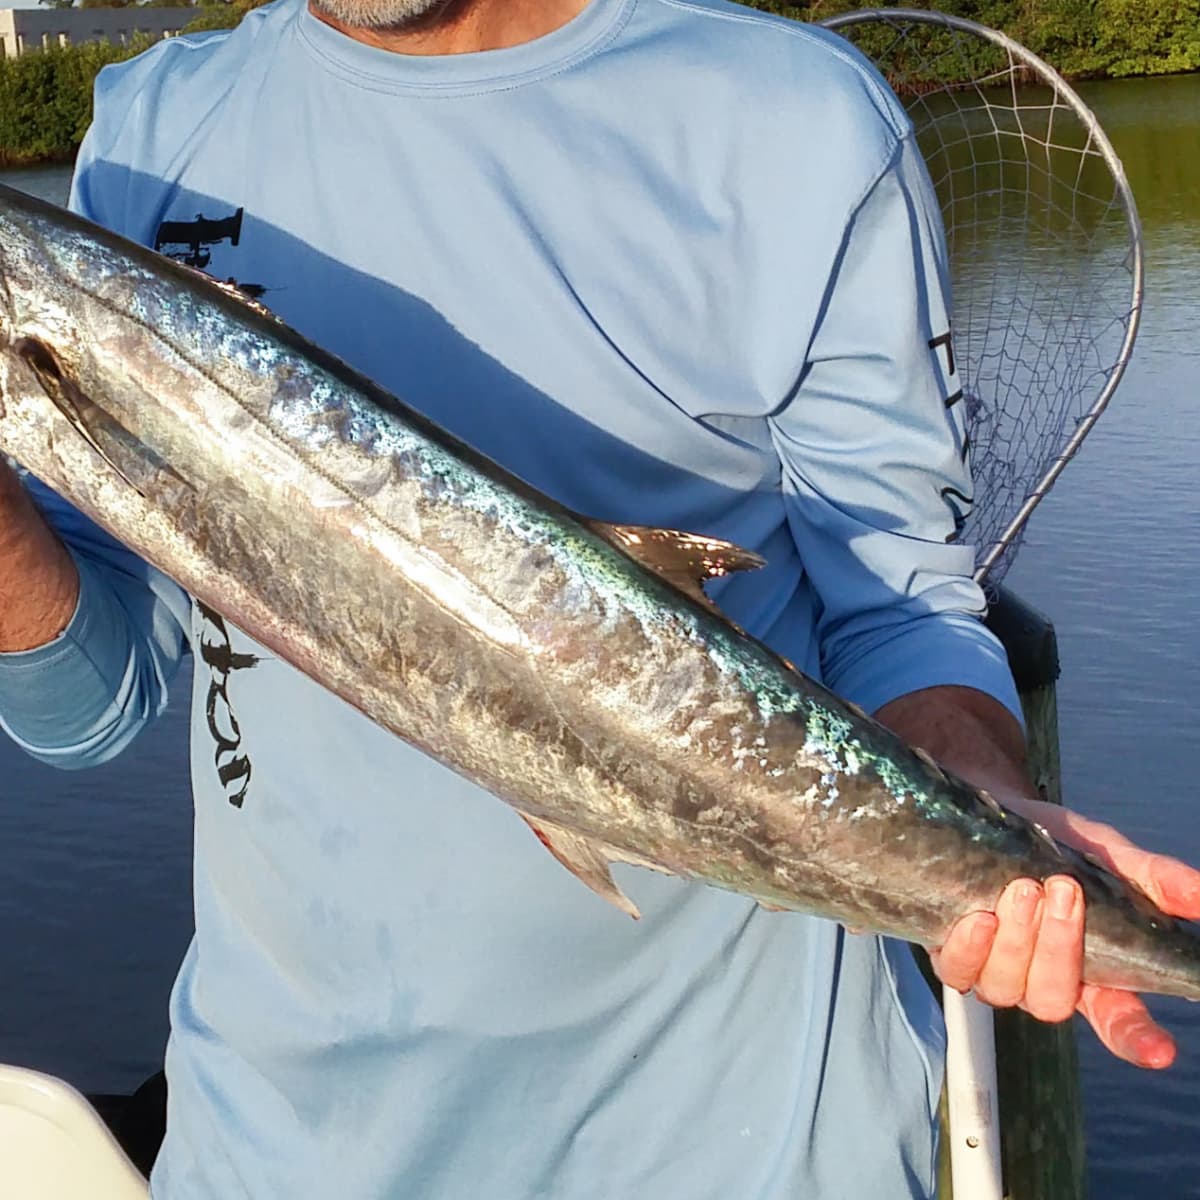 How to Catch King Mackerel (Tackle, Rigs, and More) - SkyAboveUs